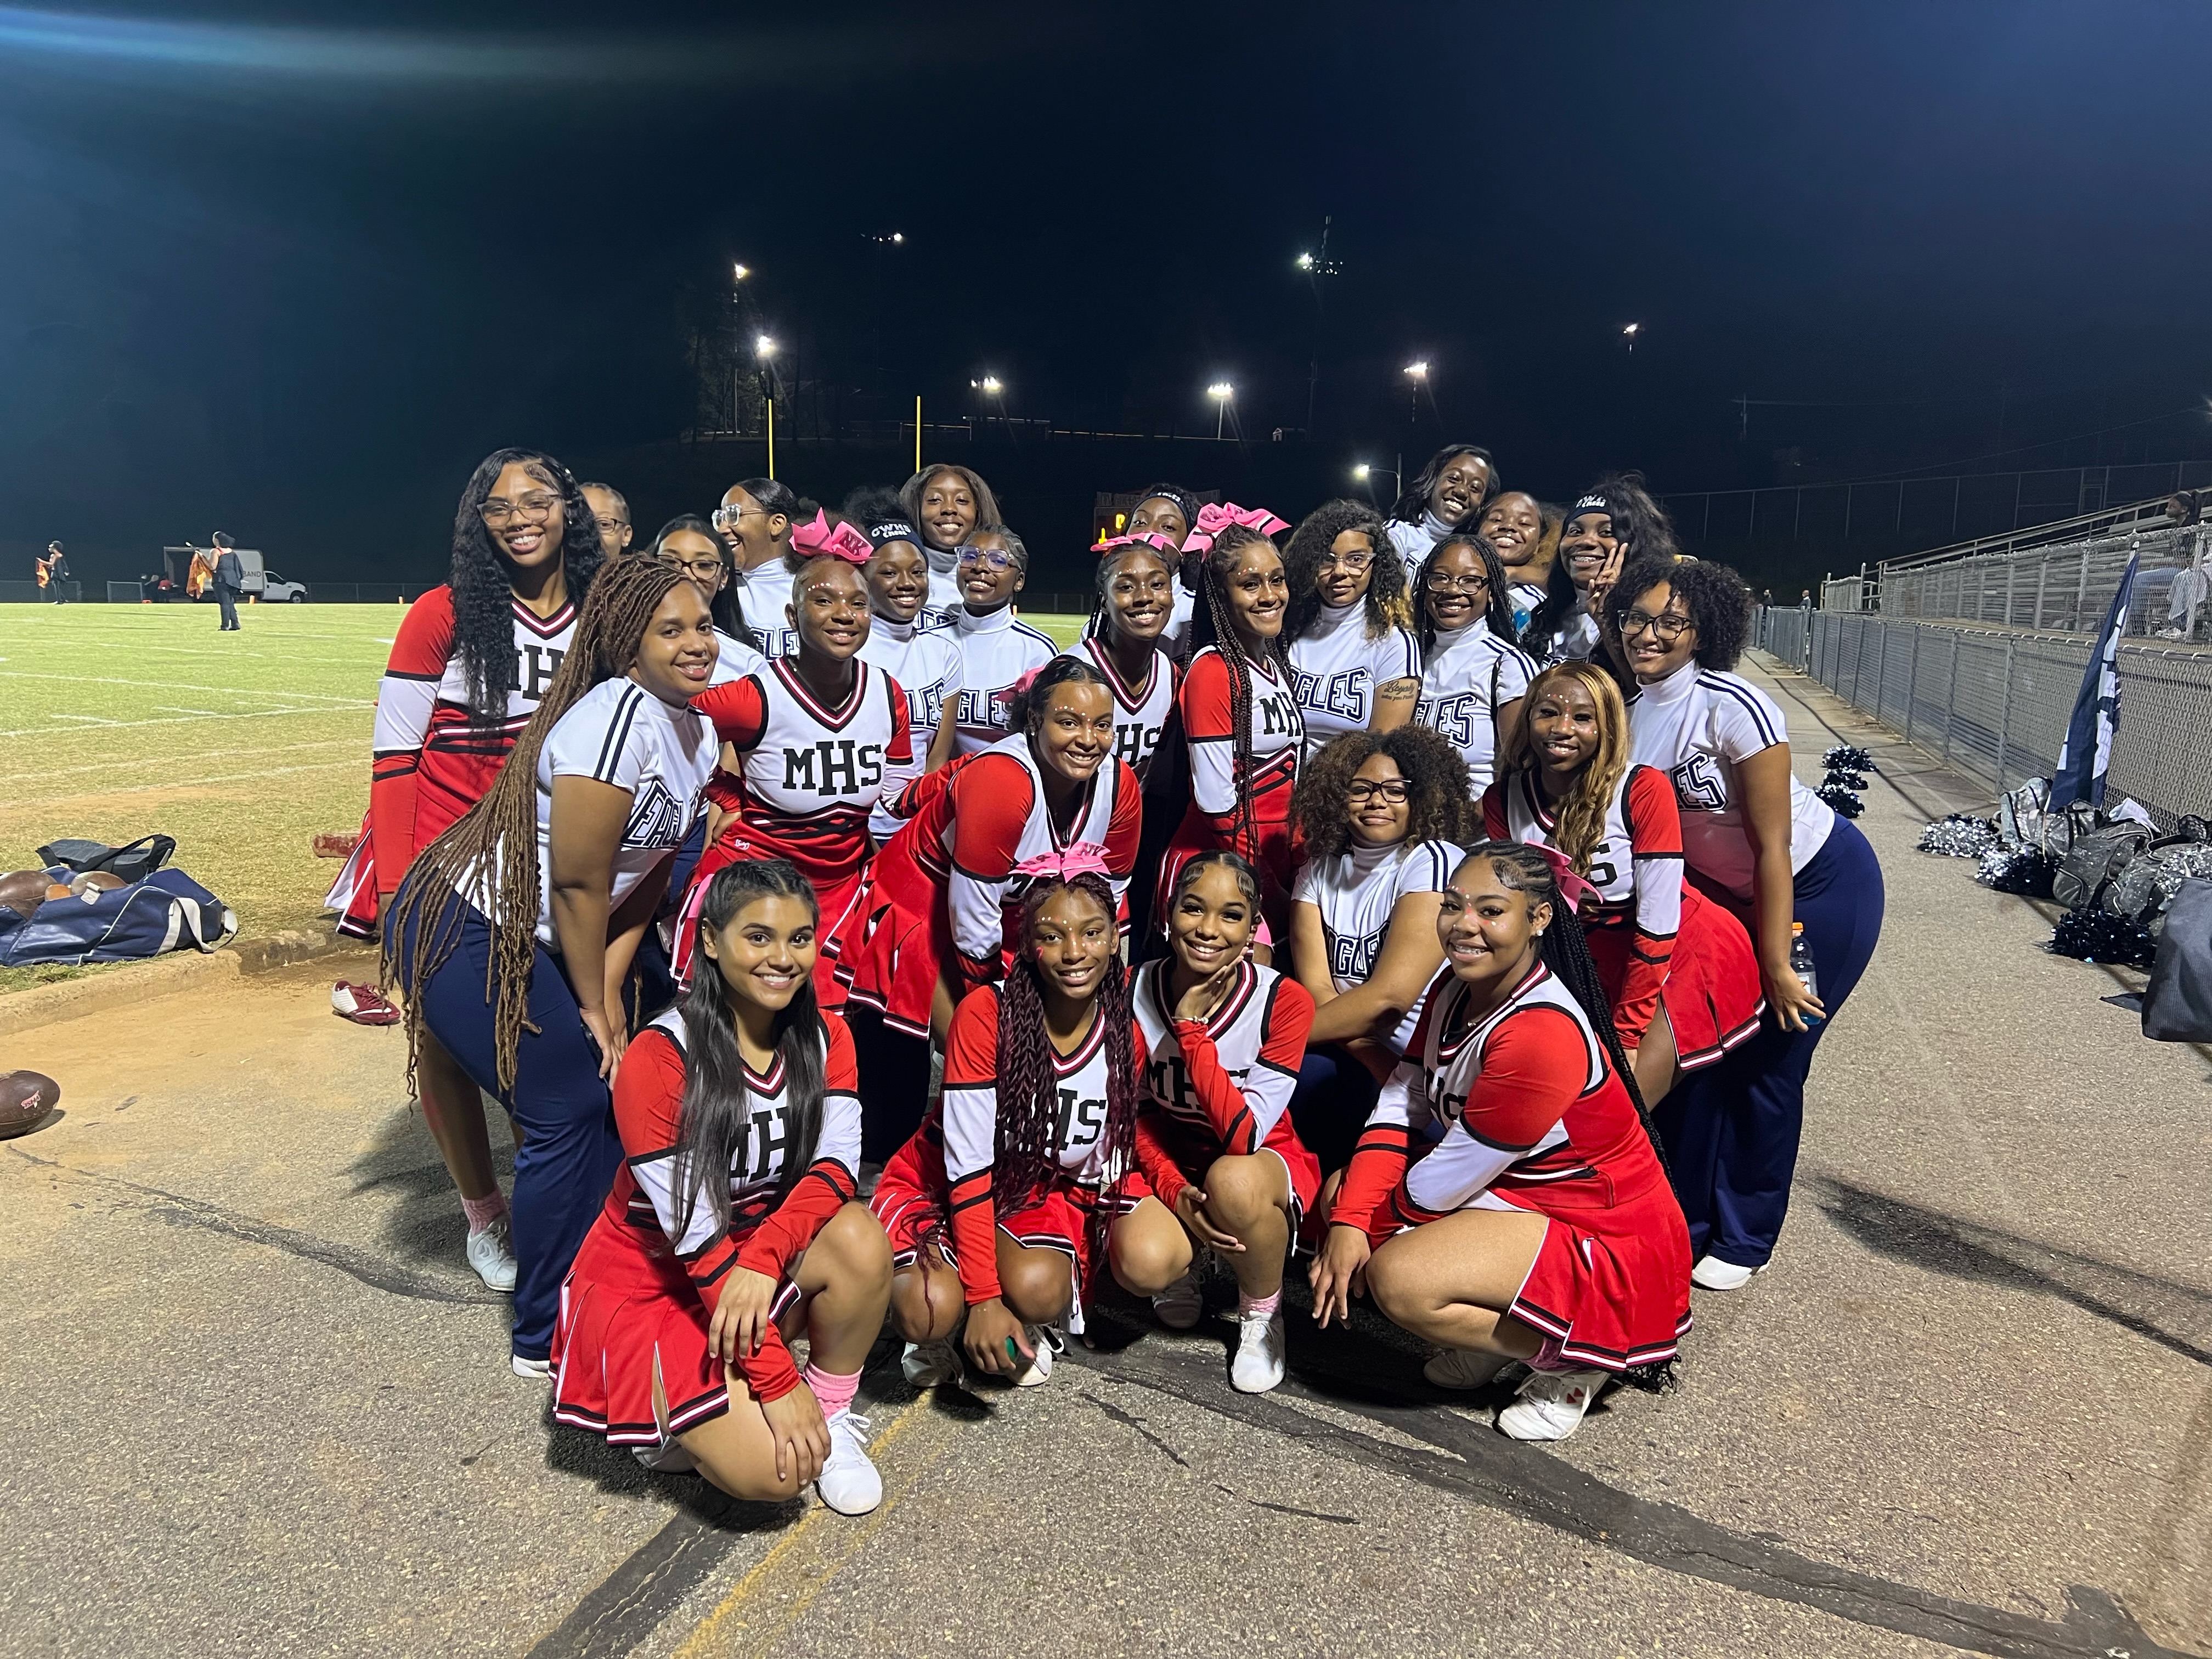 MHS Cheerleaders pose for a group photo by the football field